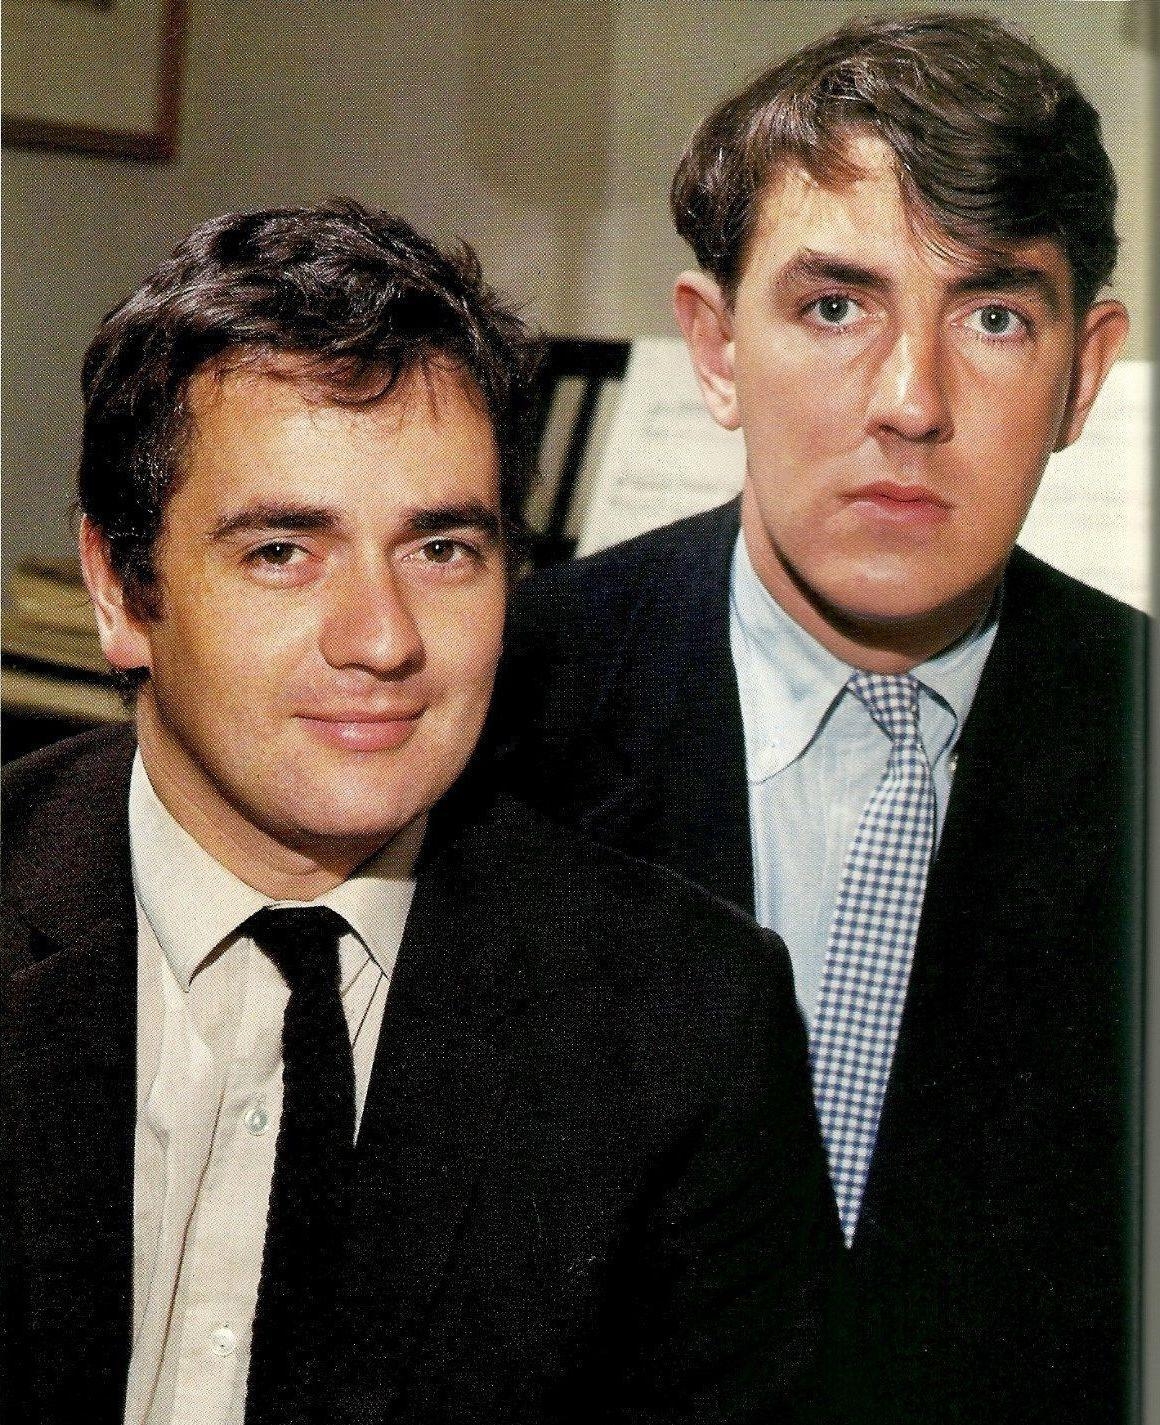 Dudley Moore and Peter Cook